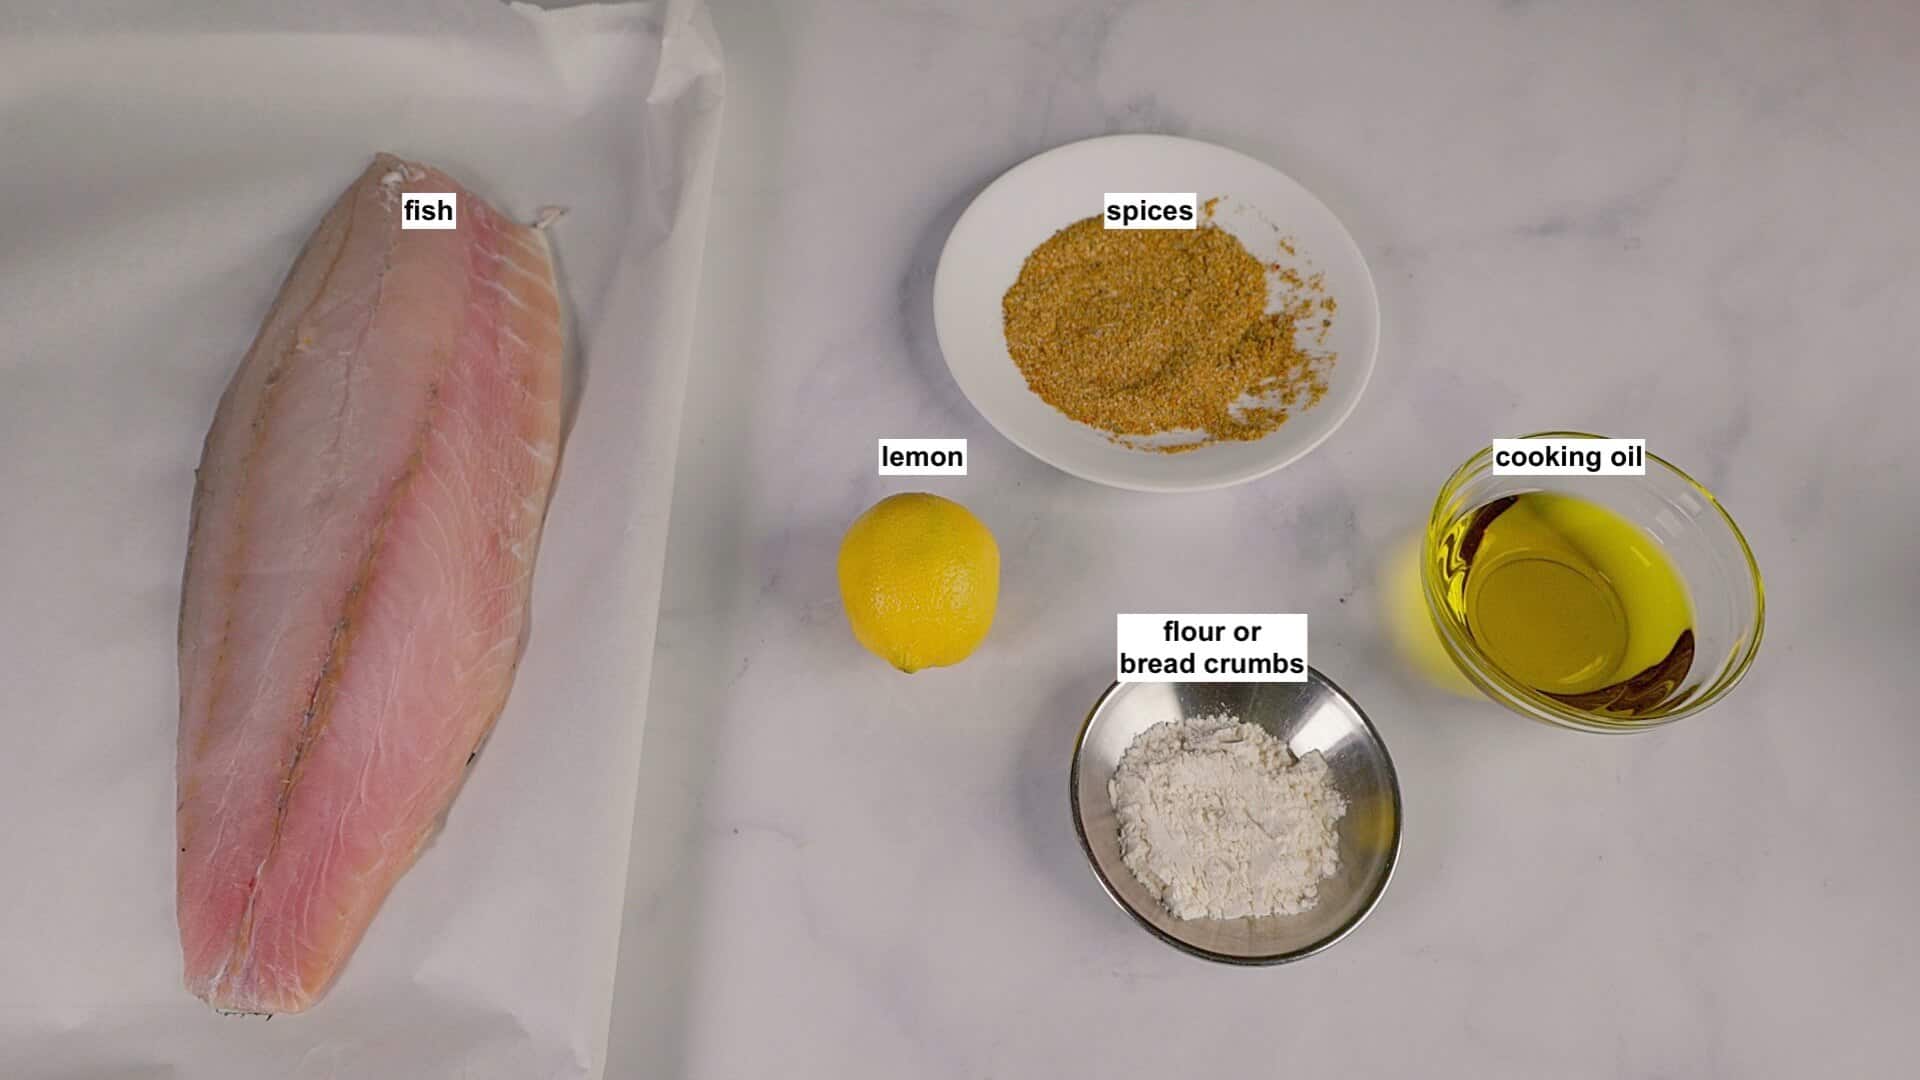 Ingredients needed for making the fish.